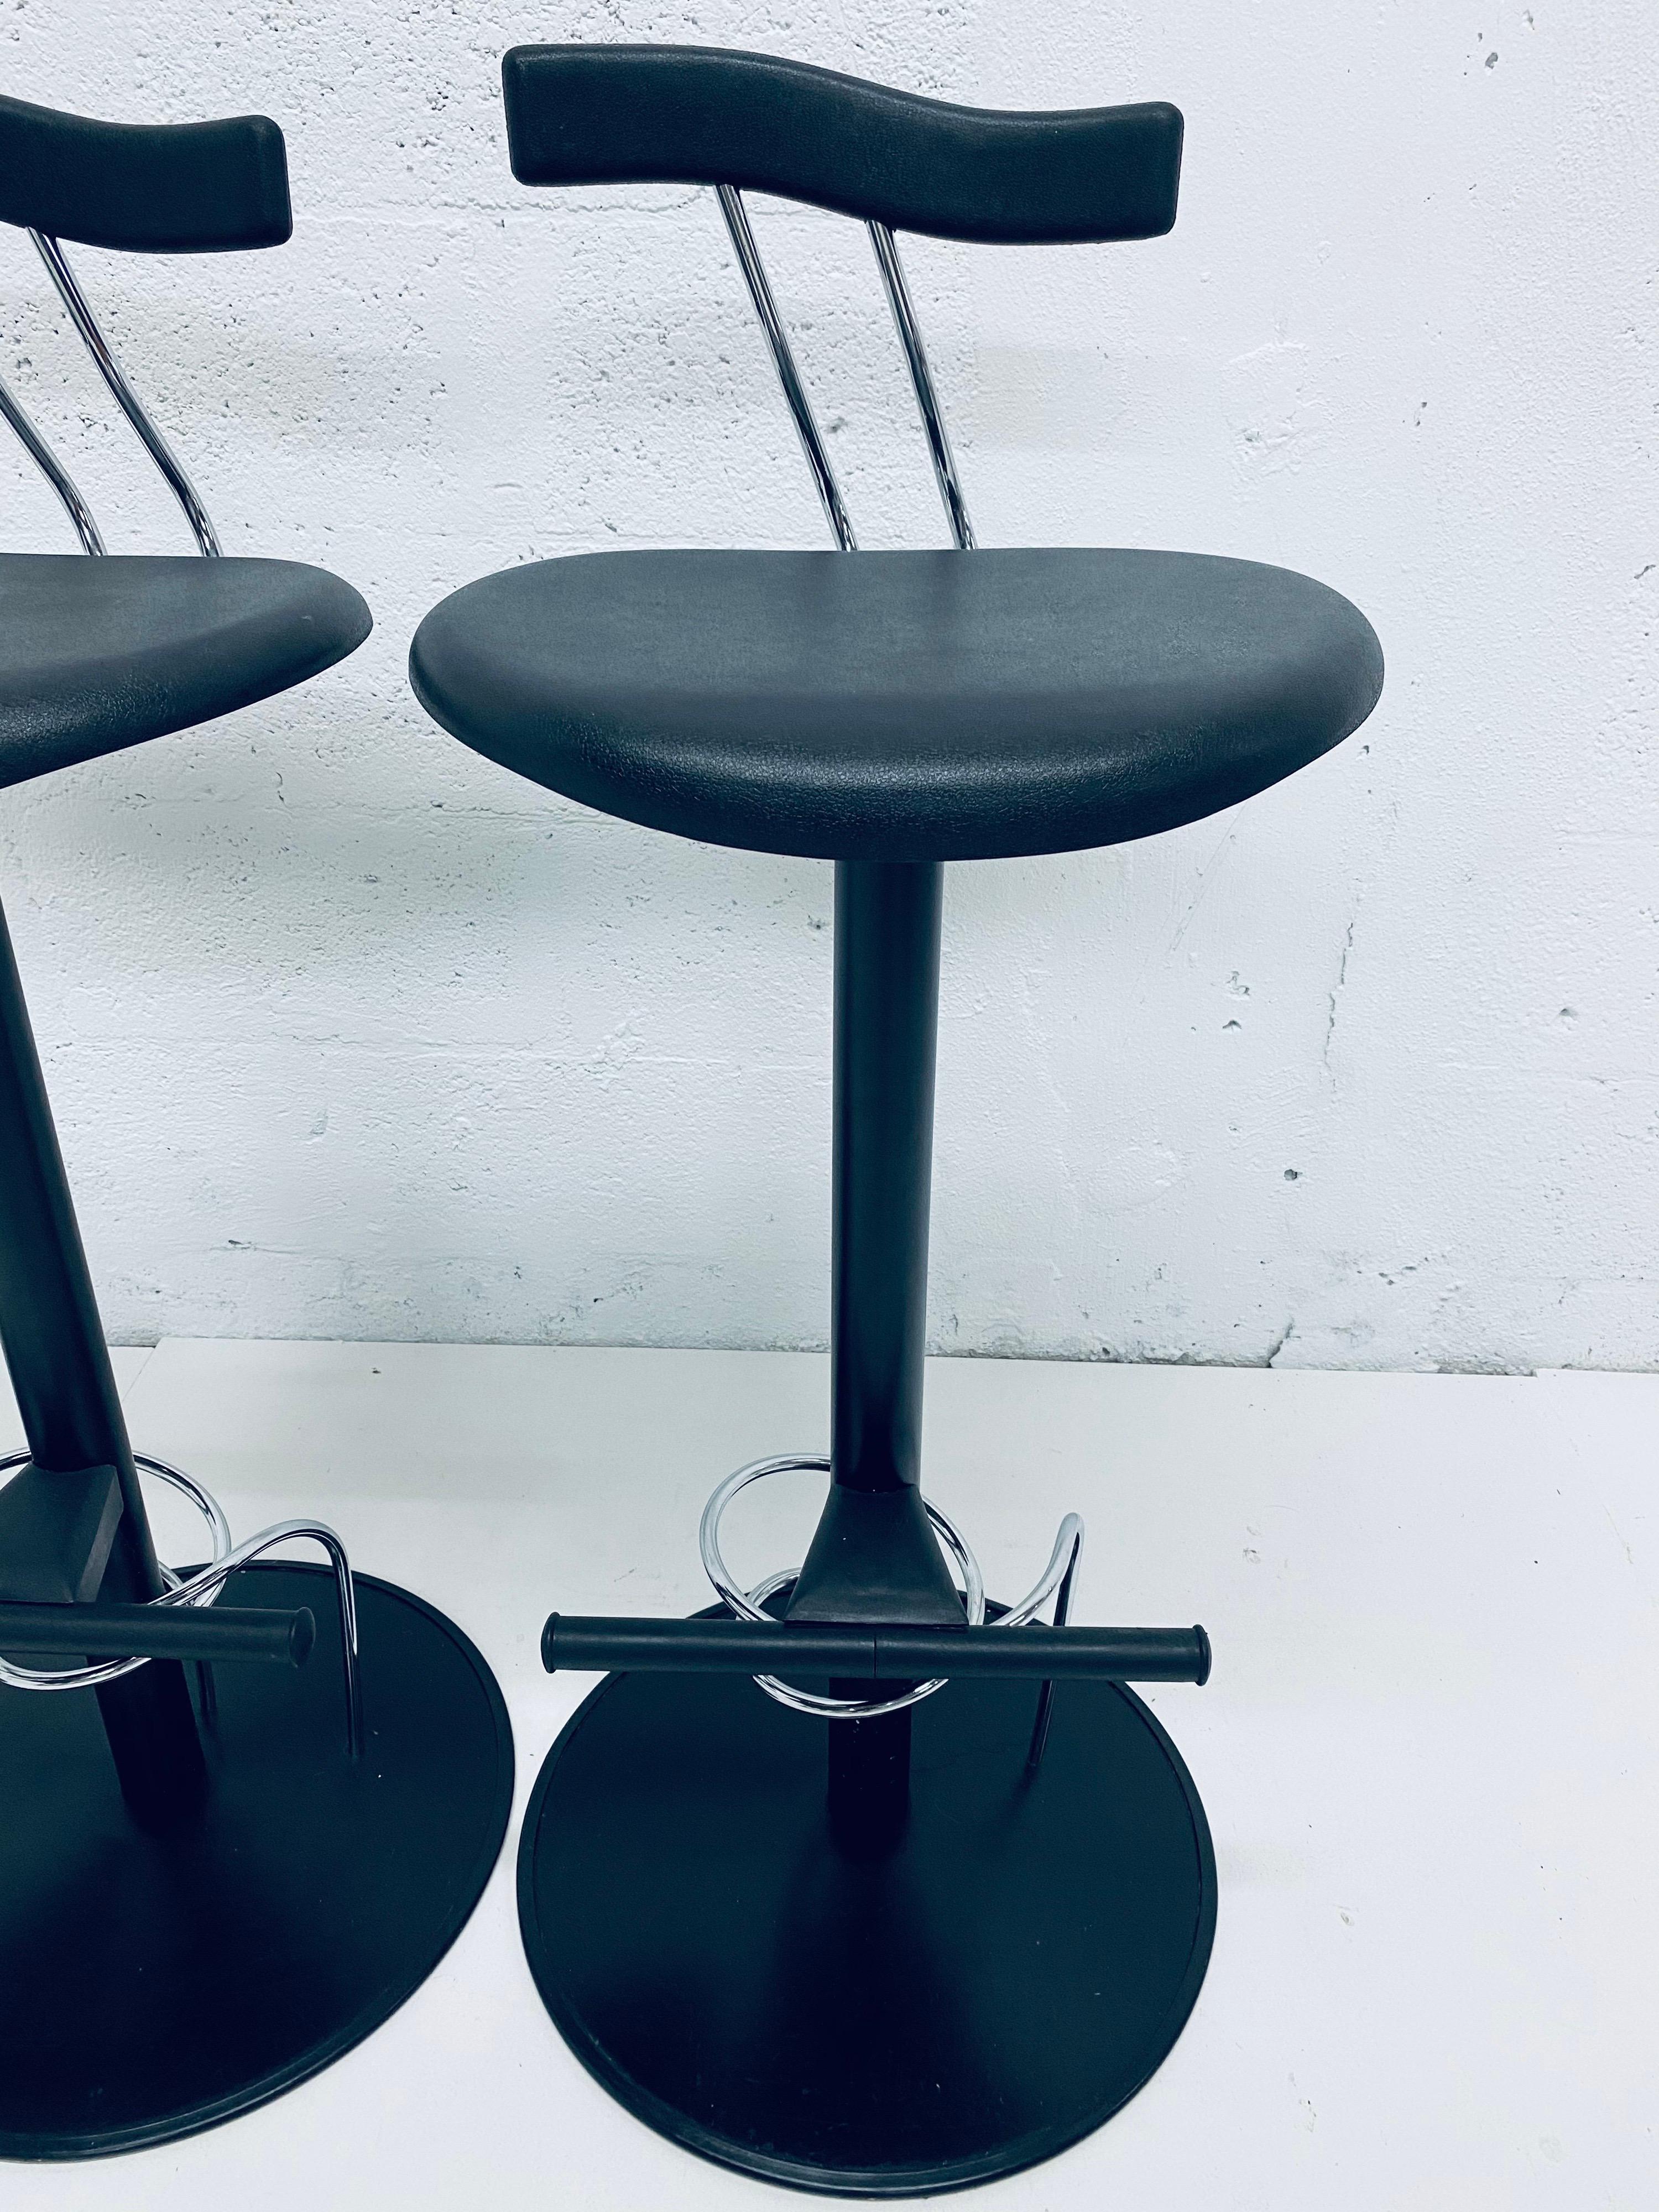 Steel Three Postmodern Memphis Style Bar Stools, Italy, 1980s For Sale